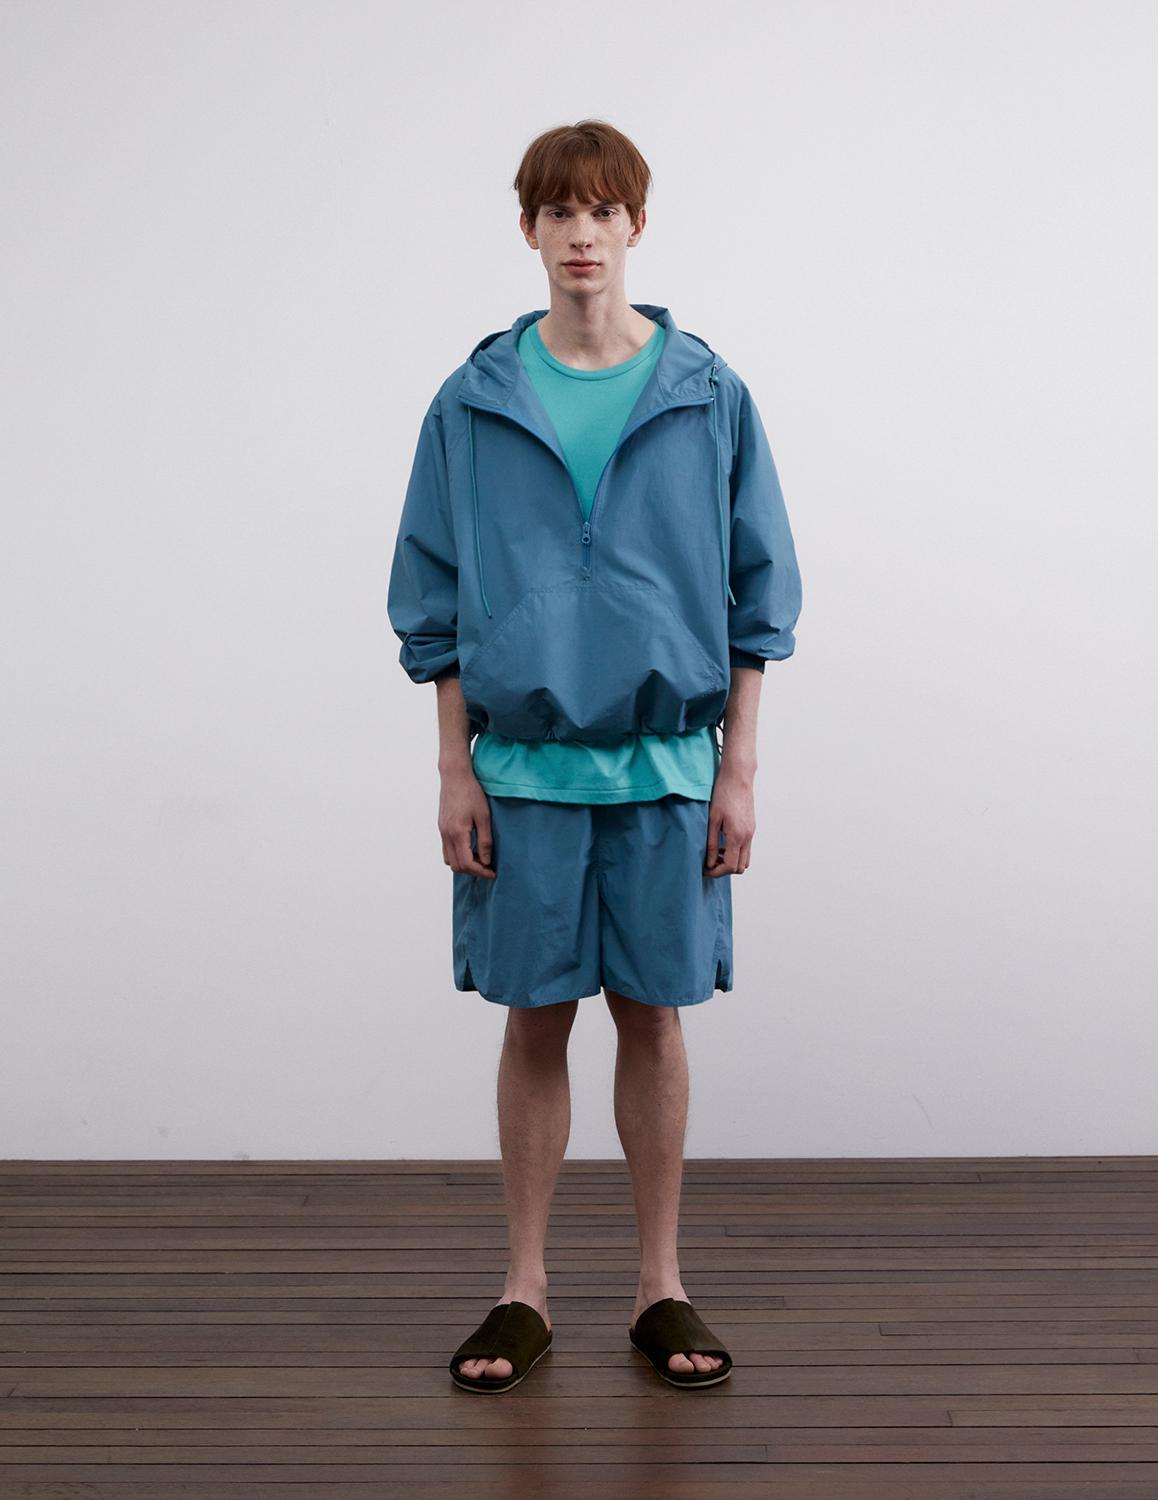 [Summer Ver.]Light Weather Pullover Hoodie Anorak &amp; Daily Shorts Set Up_Sea Blue